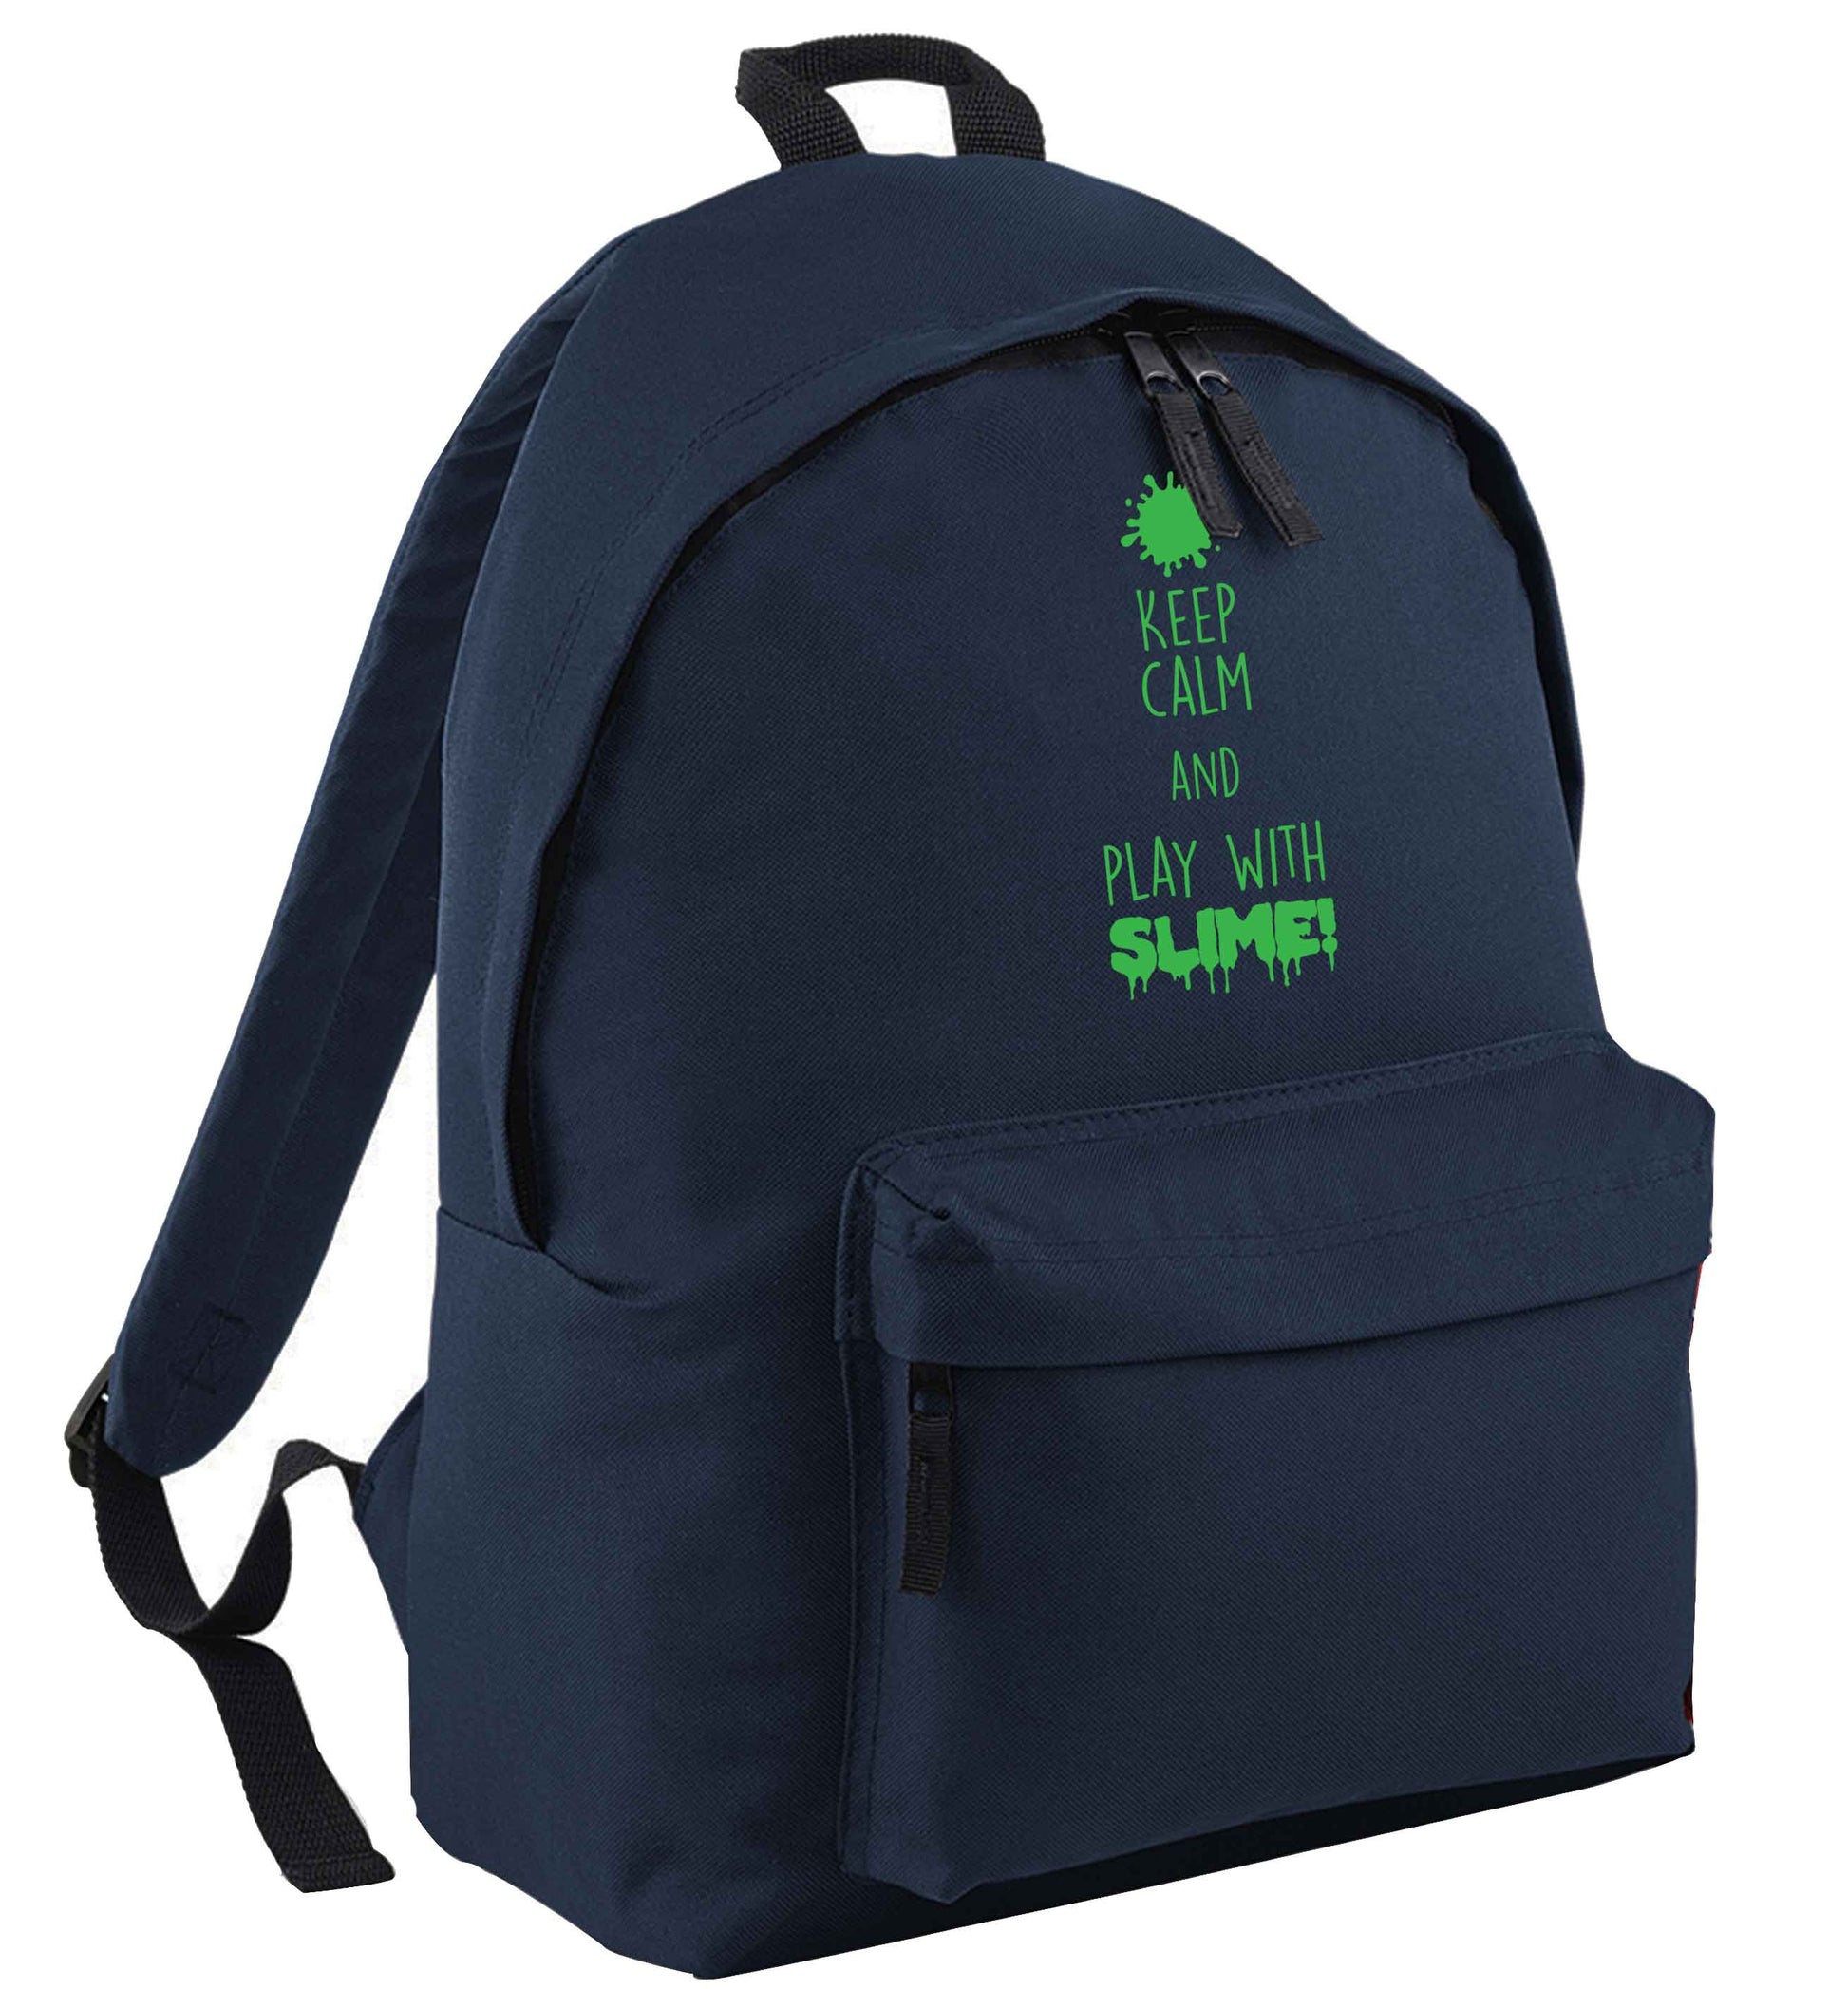 Neon green keep calm and play with slime!navy adults backpack